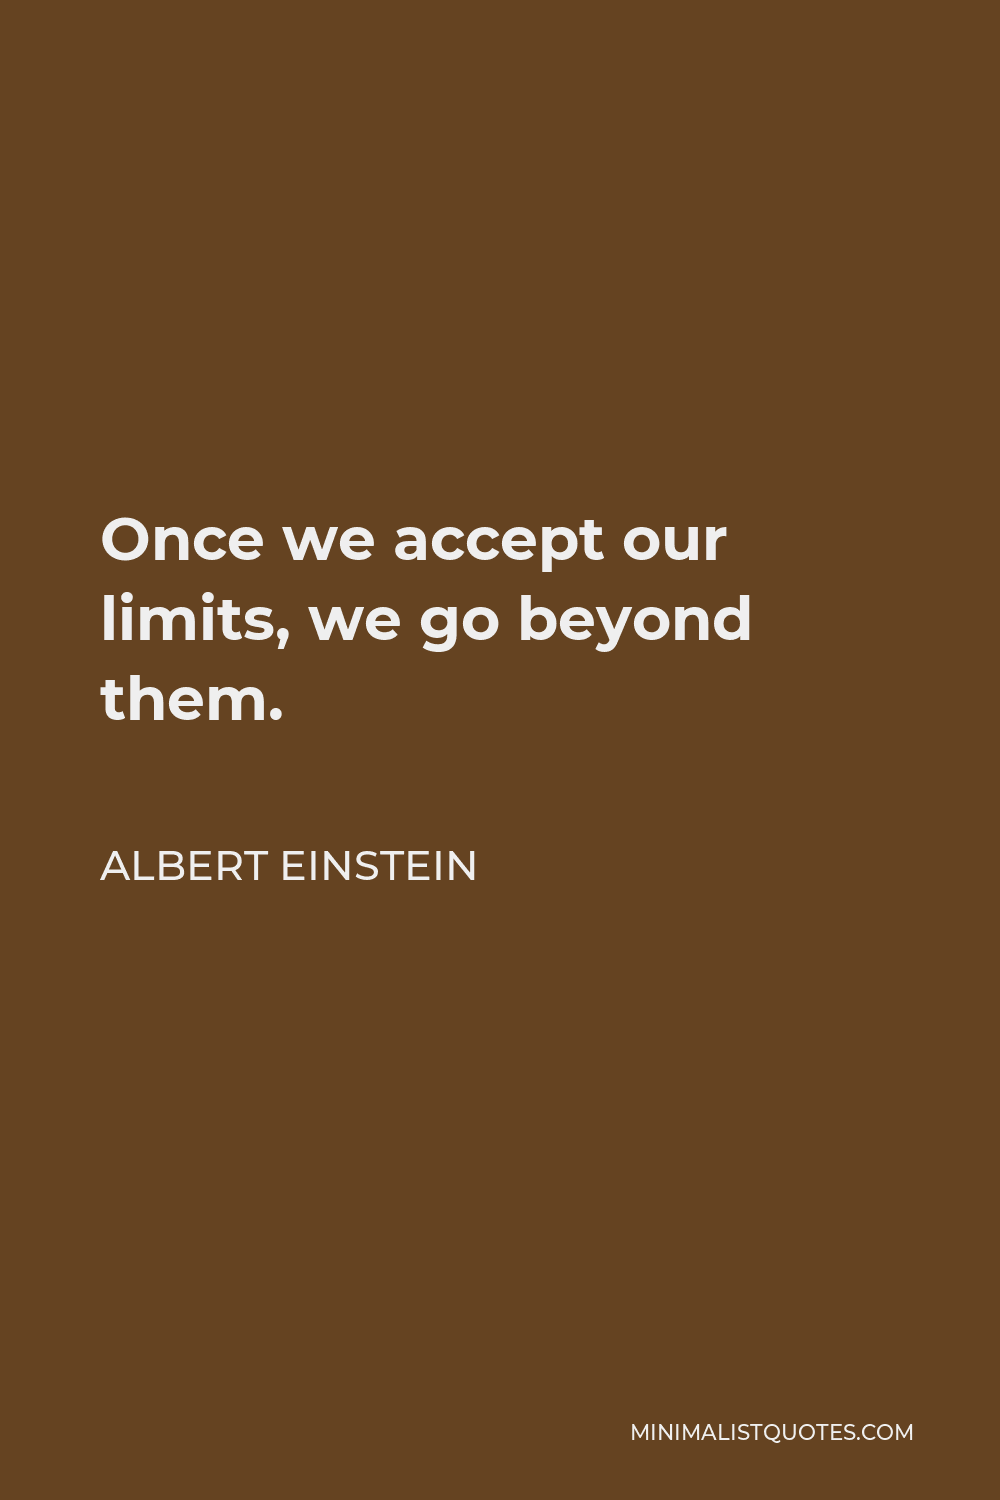 Albert Einstein Quote - Once we accept our limits, we go beyond them.